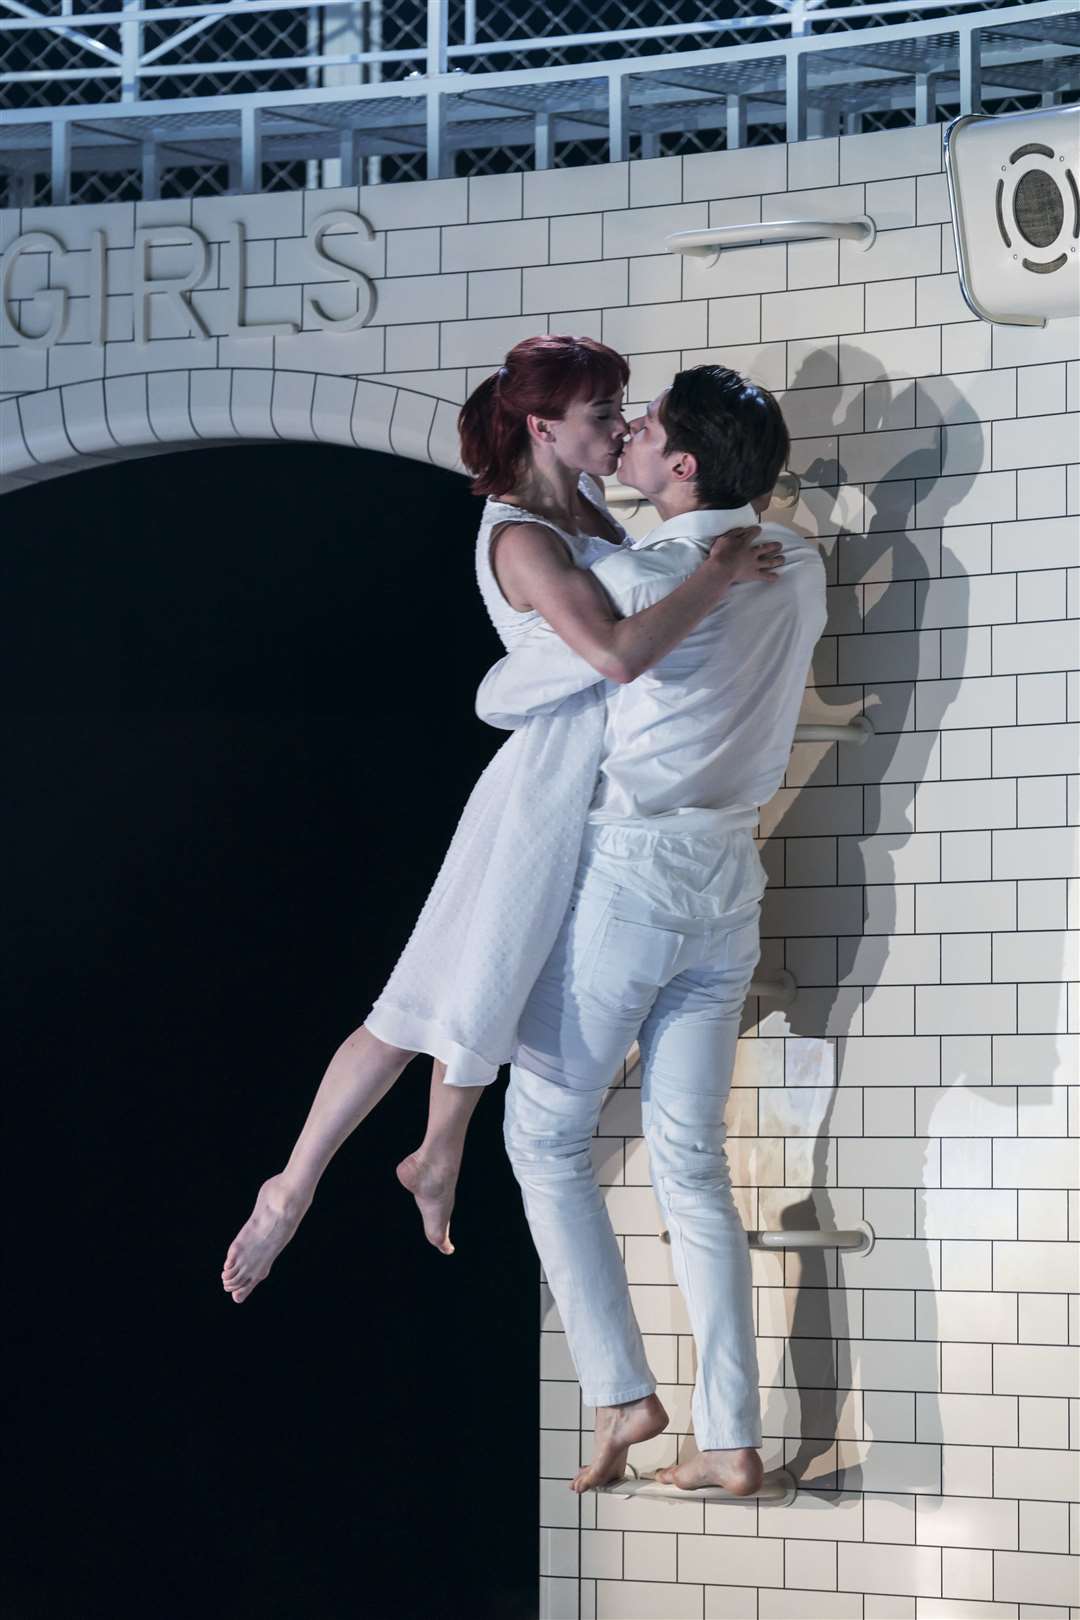 Juliet (Cordelia Braithwaite) and Romeo (Paris Fitzpatrick) share a never ending kiss as he lifts her through the air in Matthew Bourne's Romeo and Juliet at the Marlowe Theatre. Credit: Johan Persson